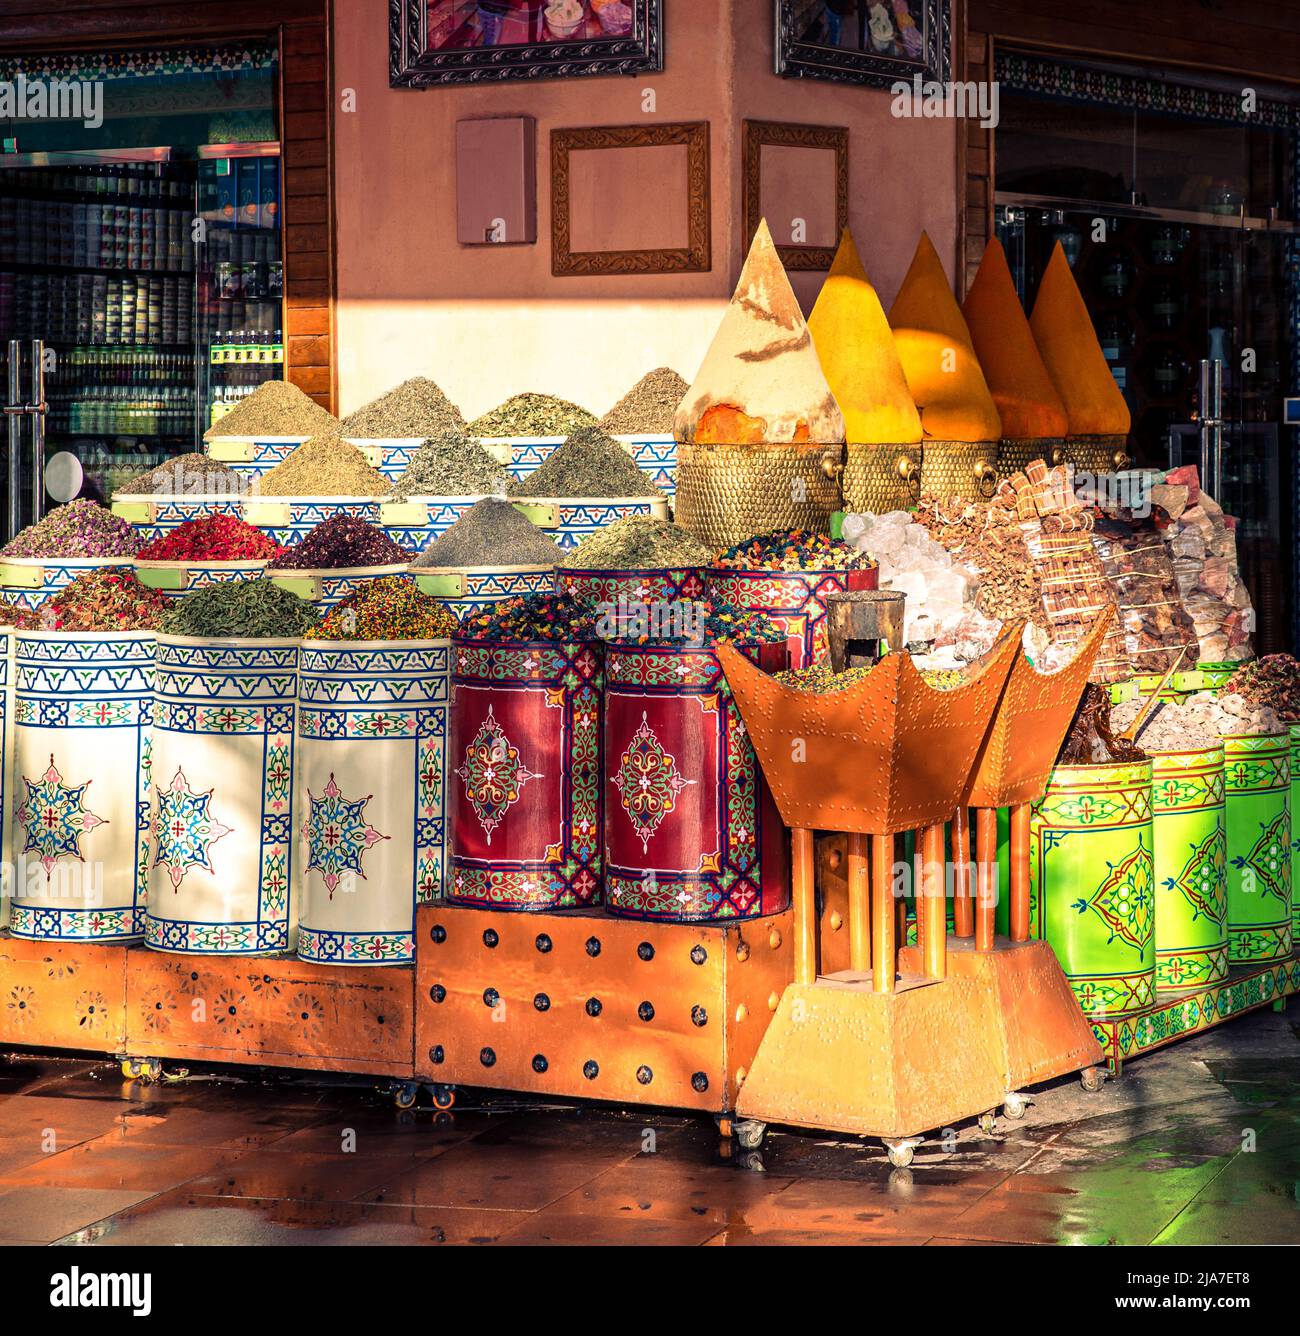 Moroccan traditional spices and ingredients shop Stock Photo